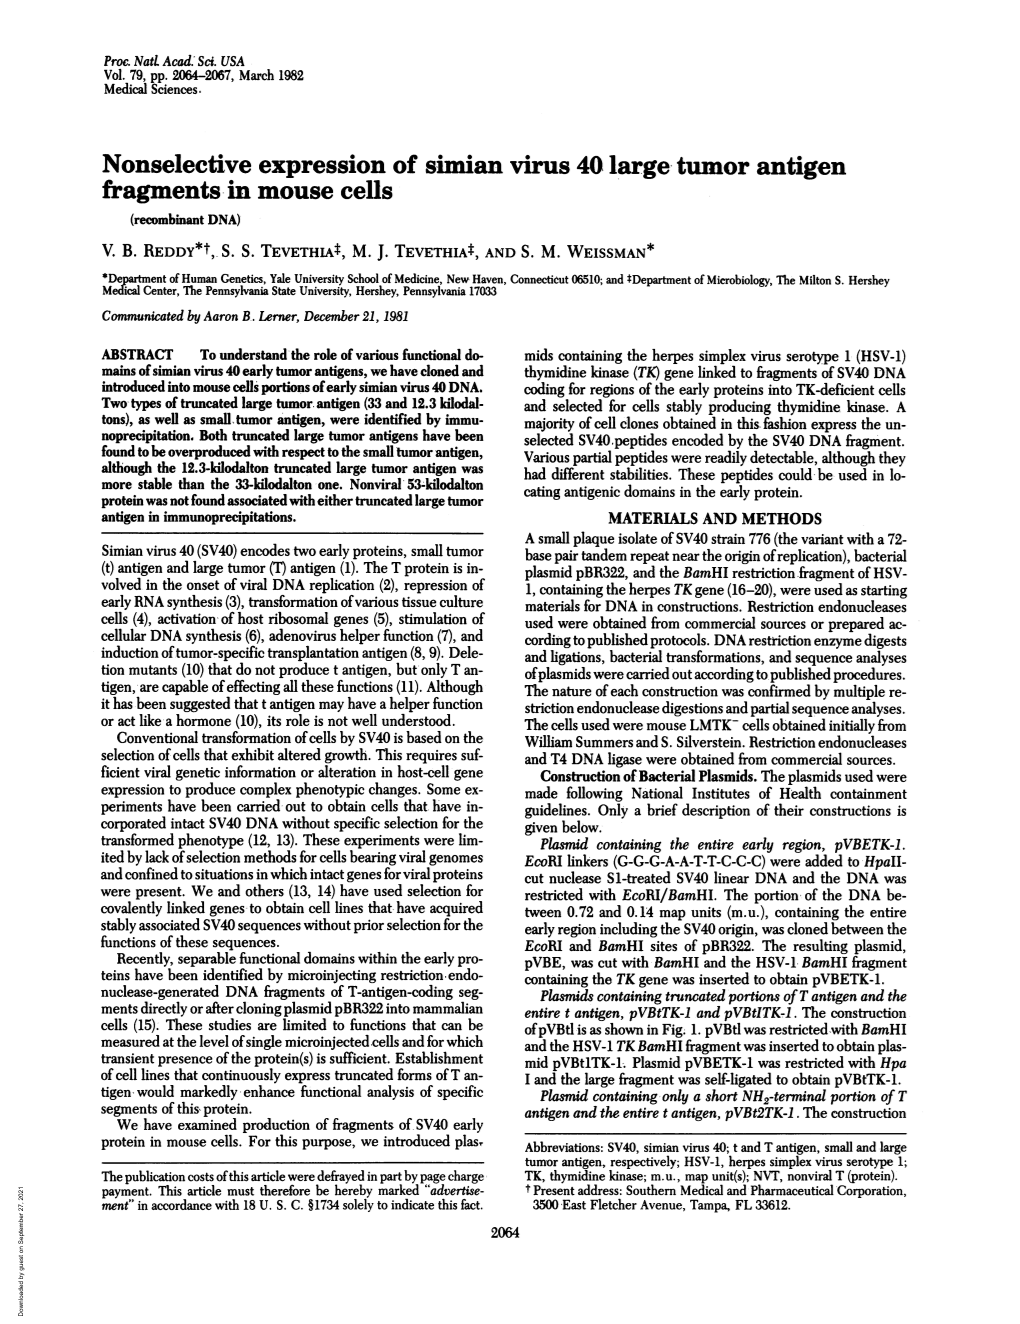 Nonselective Expression of Simian Virus 40 Large Tumor Antigen Fragments in Mouse Cells (Recombinant DNA) V